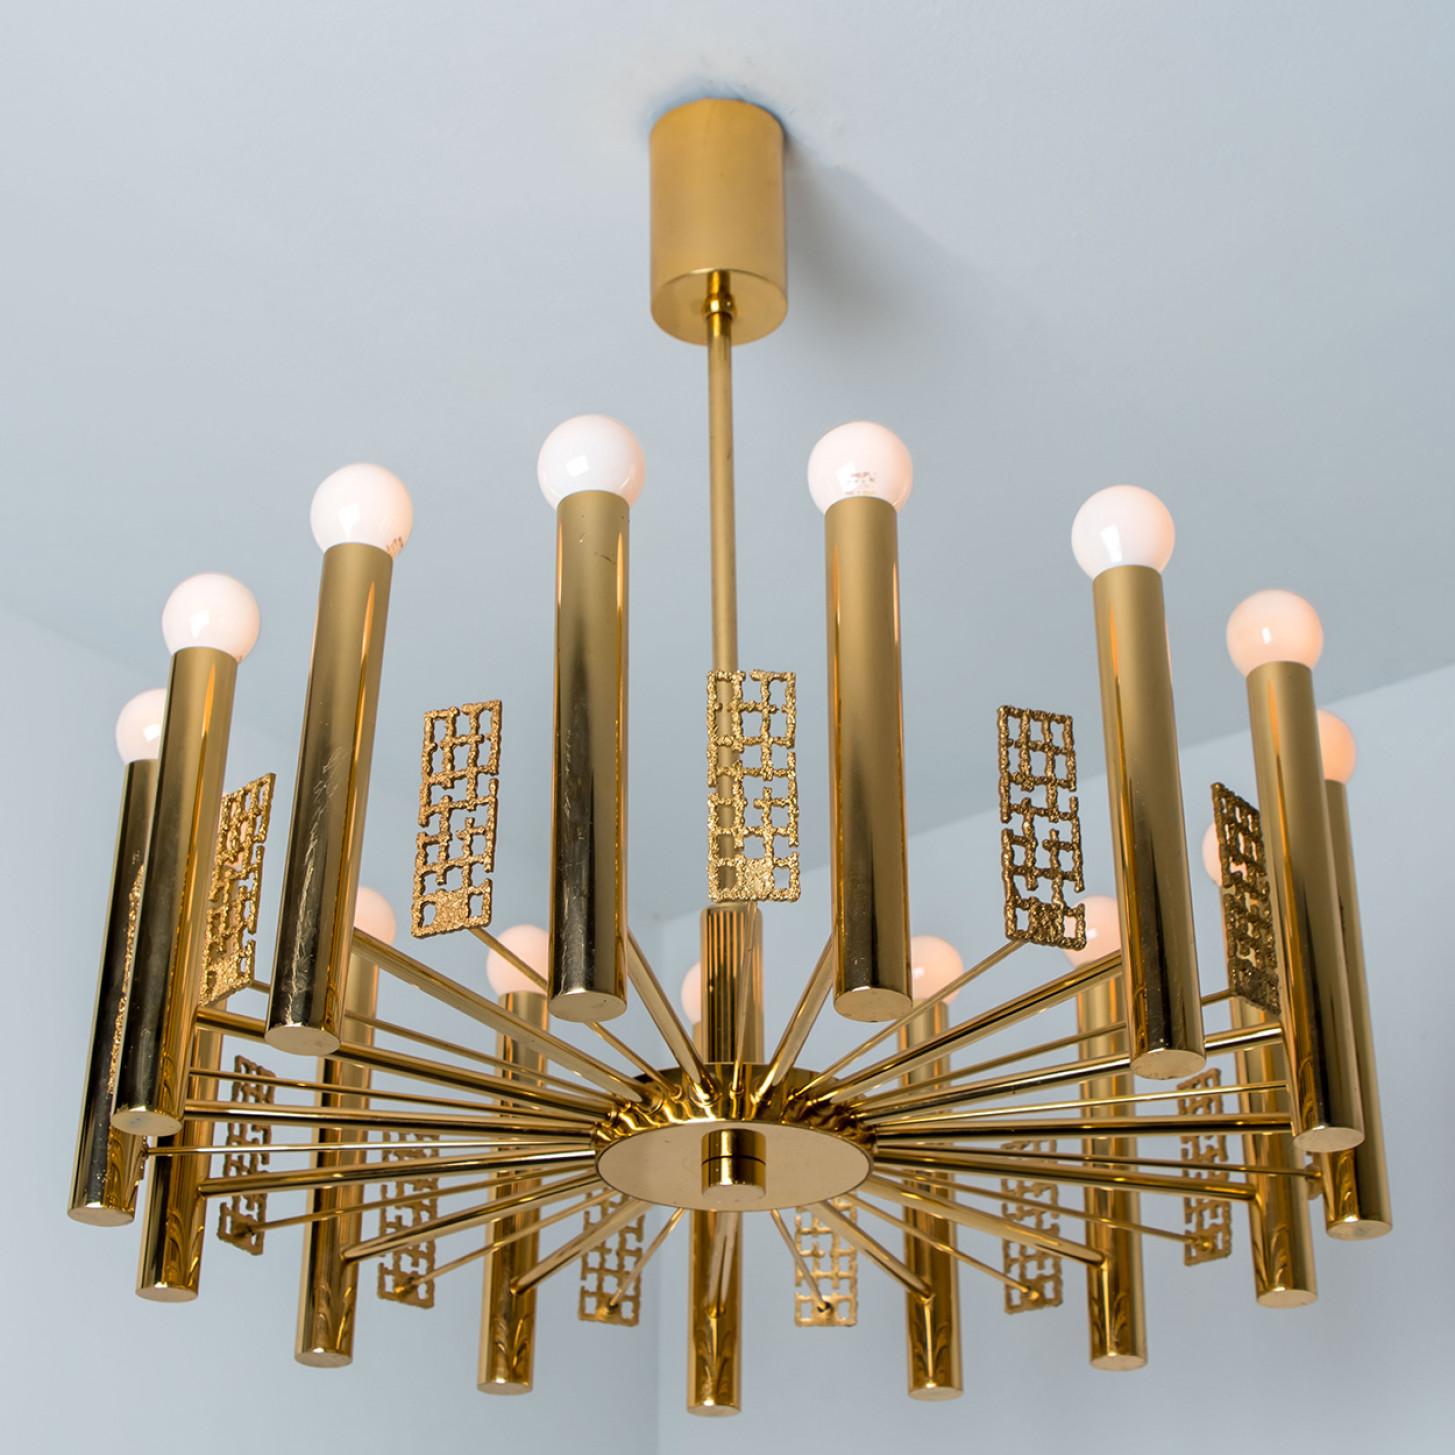 Wonderful high-end chandelier in the style of Sciolari. With long hanging brass 'tubes' and gold details giving this piece an elegant appearance which refracts the light, filling a room with a soft, warm glow.

Dimensions:
Height: 25.59